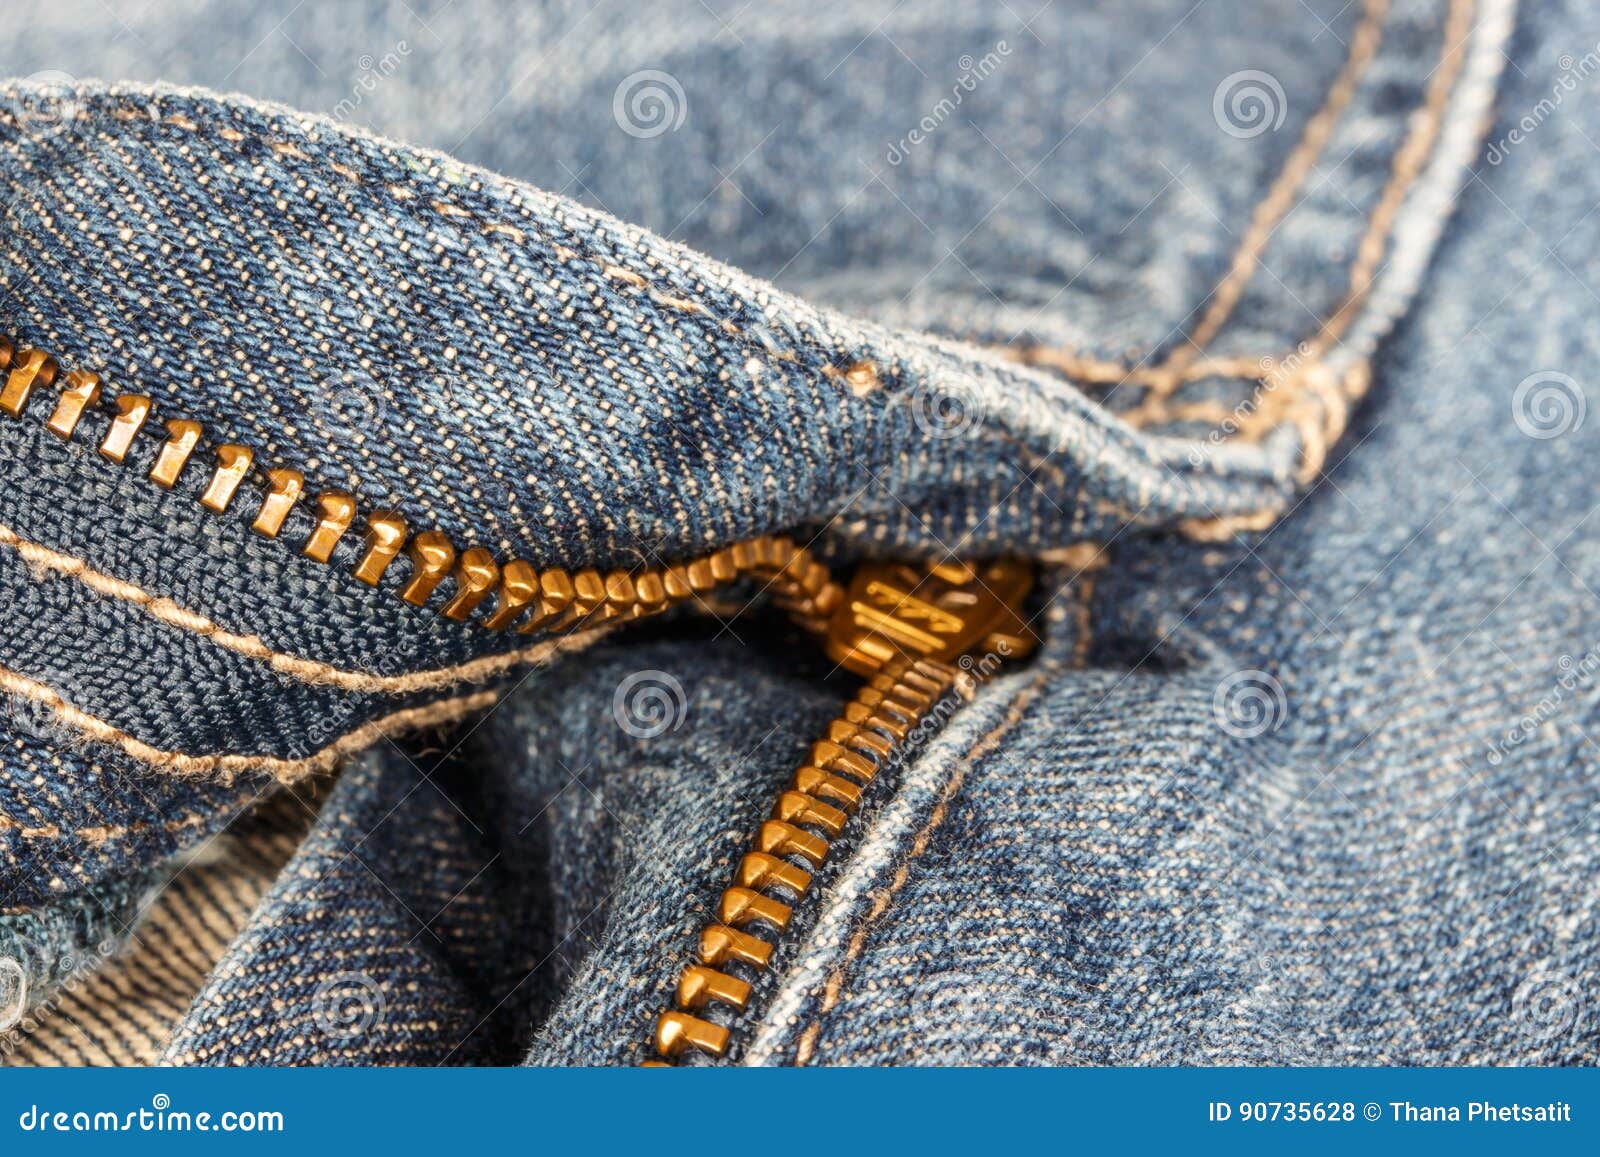 Detail of Blue Jeans Zipper Stock Photo - Image of rough, brass: 90735628